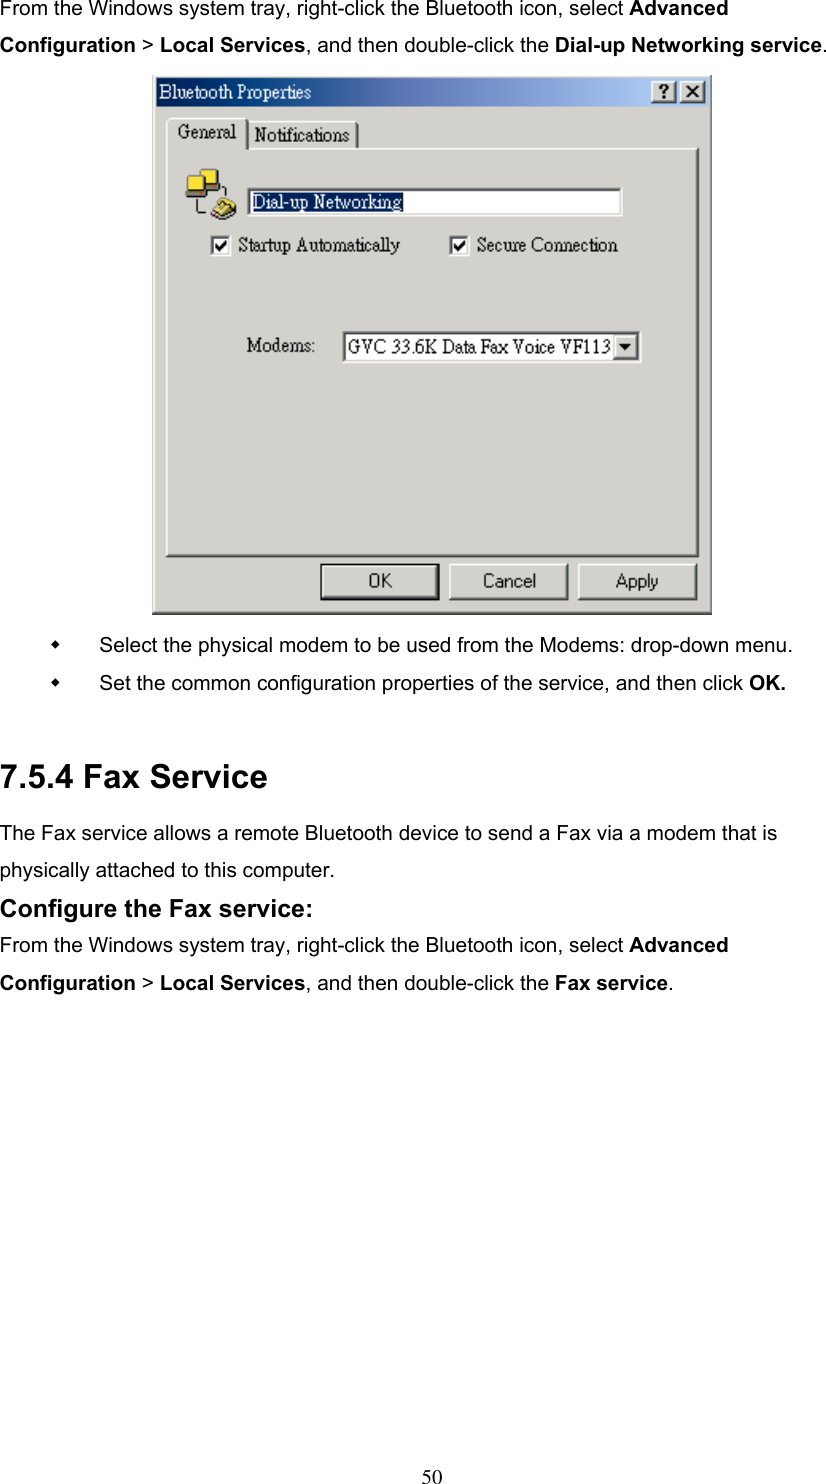 From the Windows system tray, right-click the Bluetooth icon, select Advanced Configuration &gt; Local Services, and then double-click the Dial-up Networking service.    Select the physical modem to be used from the Modems: drop-down menu.   Set the common configuration properties of the service, and then click OK.  7.5.4 Fax Service The Fax service allows a remote Bluetooth device to send a Fax via a modem that is physically attached to this computer. Configure the Fax service: From the Windows system tray, right-click the Bluetooth icon, select Advanced Configuration &gt; Local Services, and then double-click the Fax service.  50 